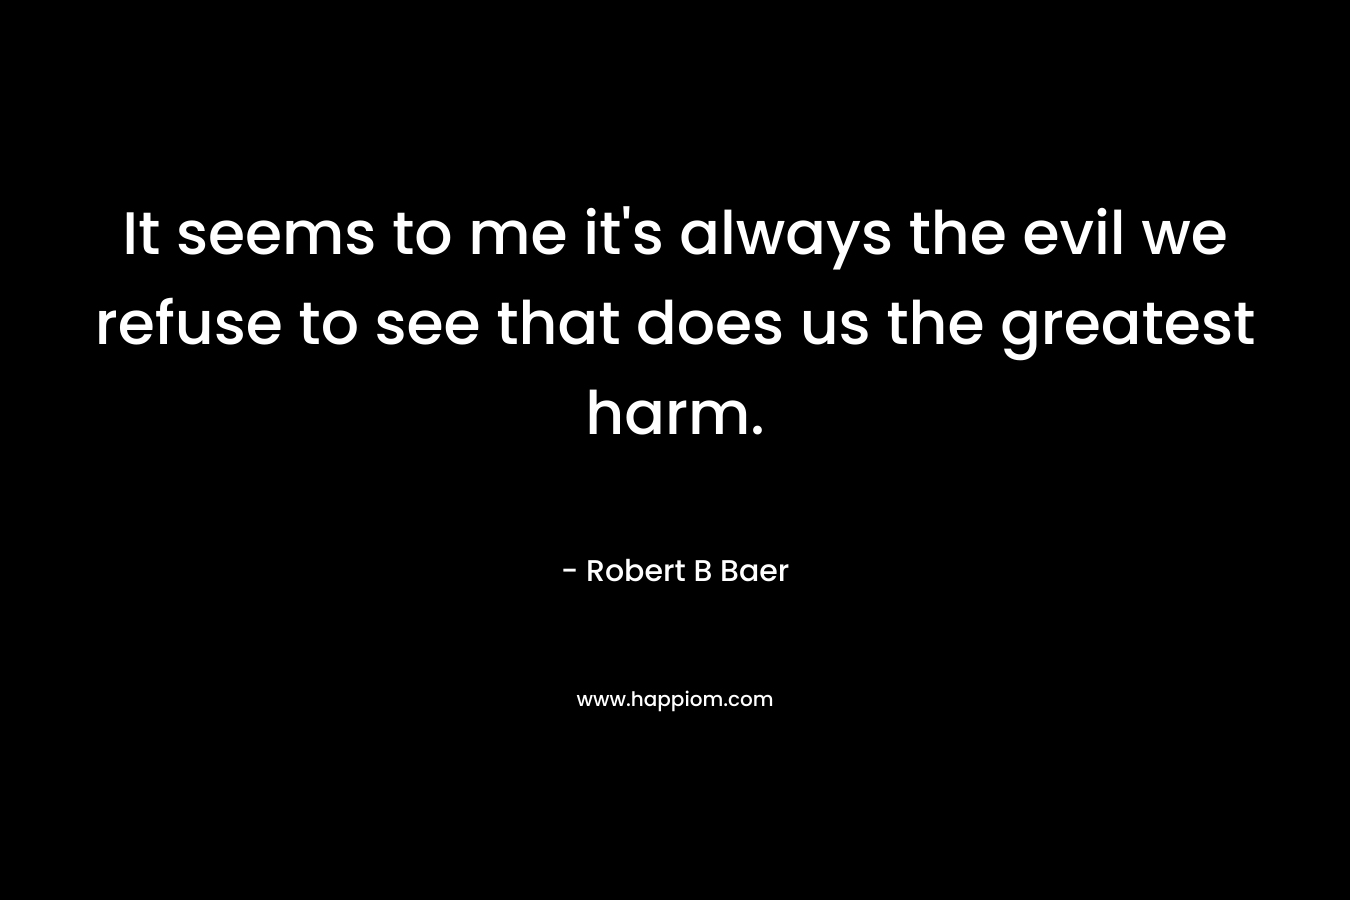 It seems to me it's always the evil we refuse to see that does us the greatest harm.